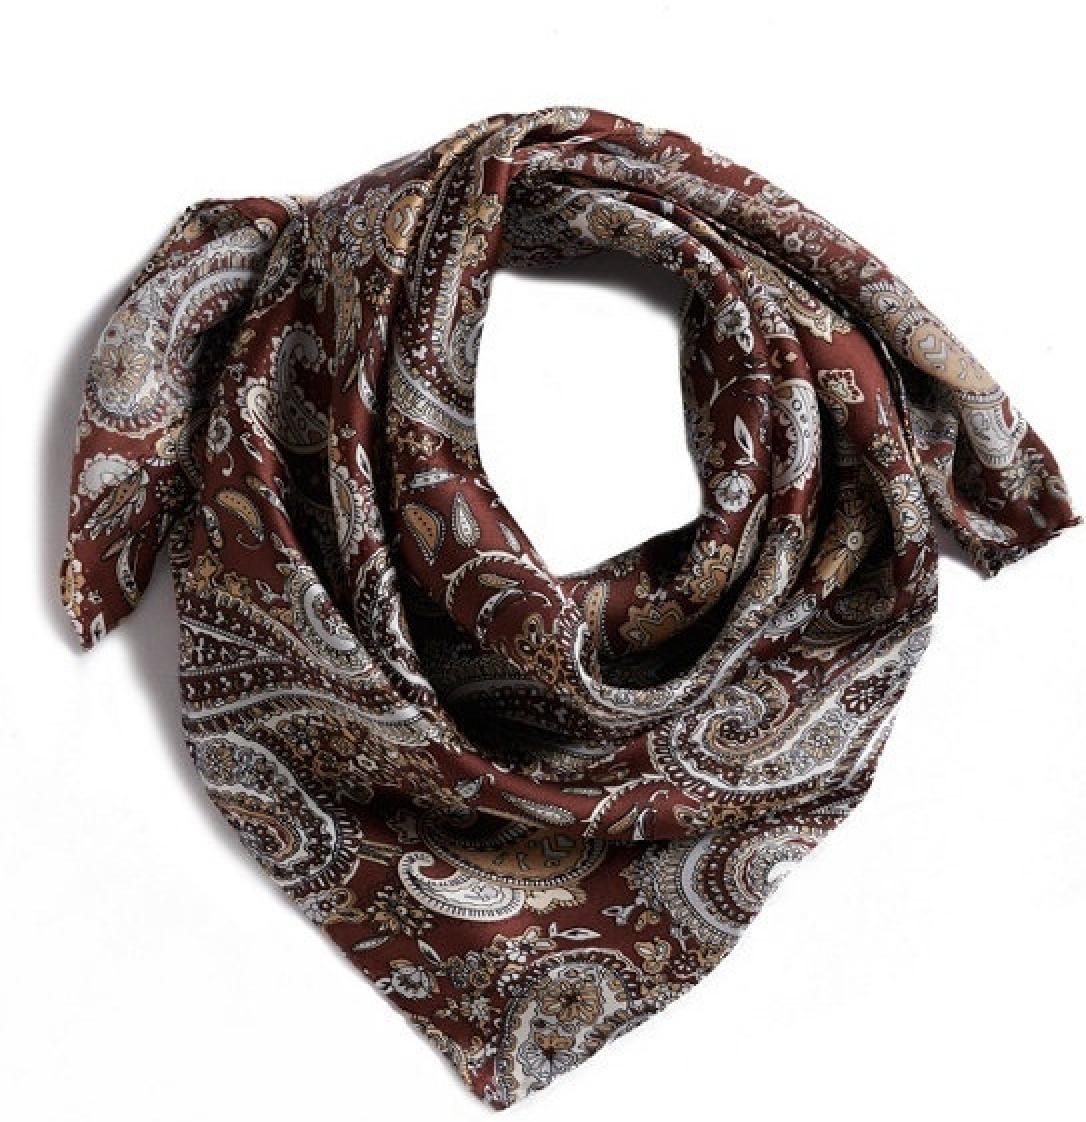 M&F Western Products Paisley Wild Rags Brown